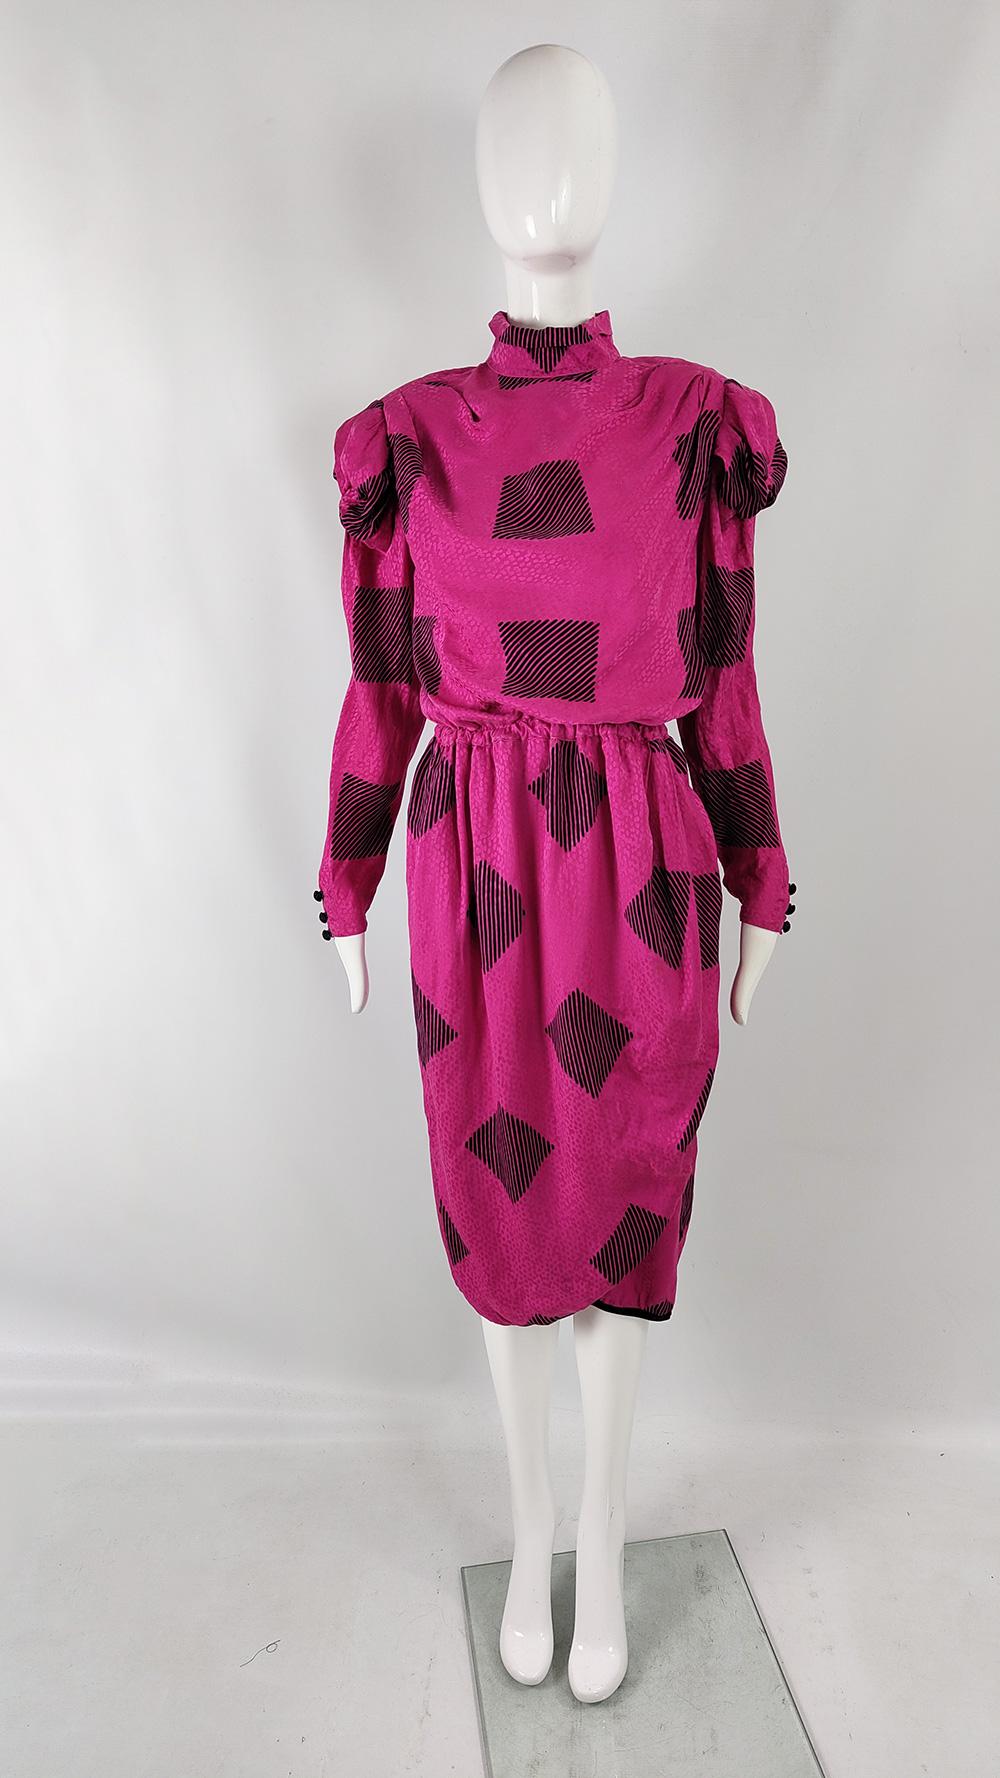 A stunning vintage womens party / evening dress from the 80s by quality Parisian designer, Robina. In a fuchsia pink silk with a satin jacquard and black geometric print throughout. The top has a typically 80s blouson fit (baggy on top with an